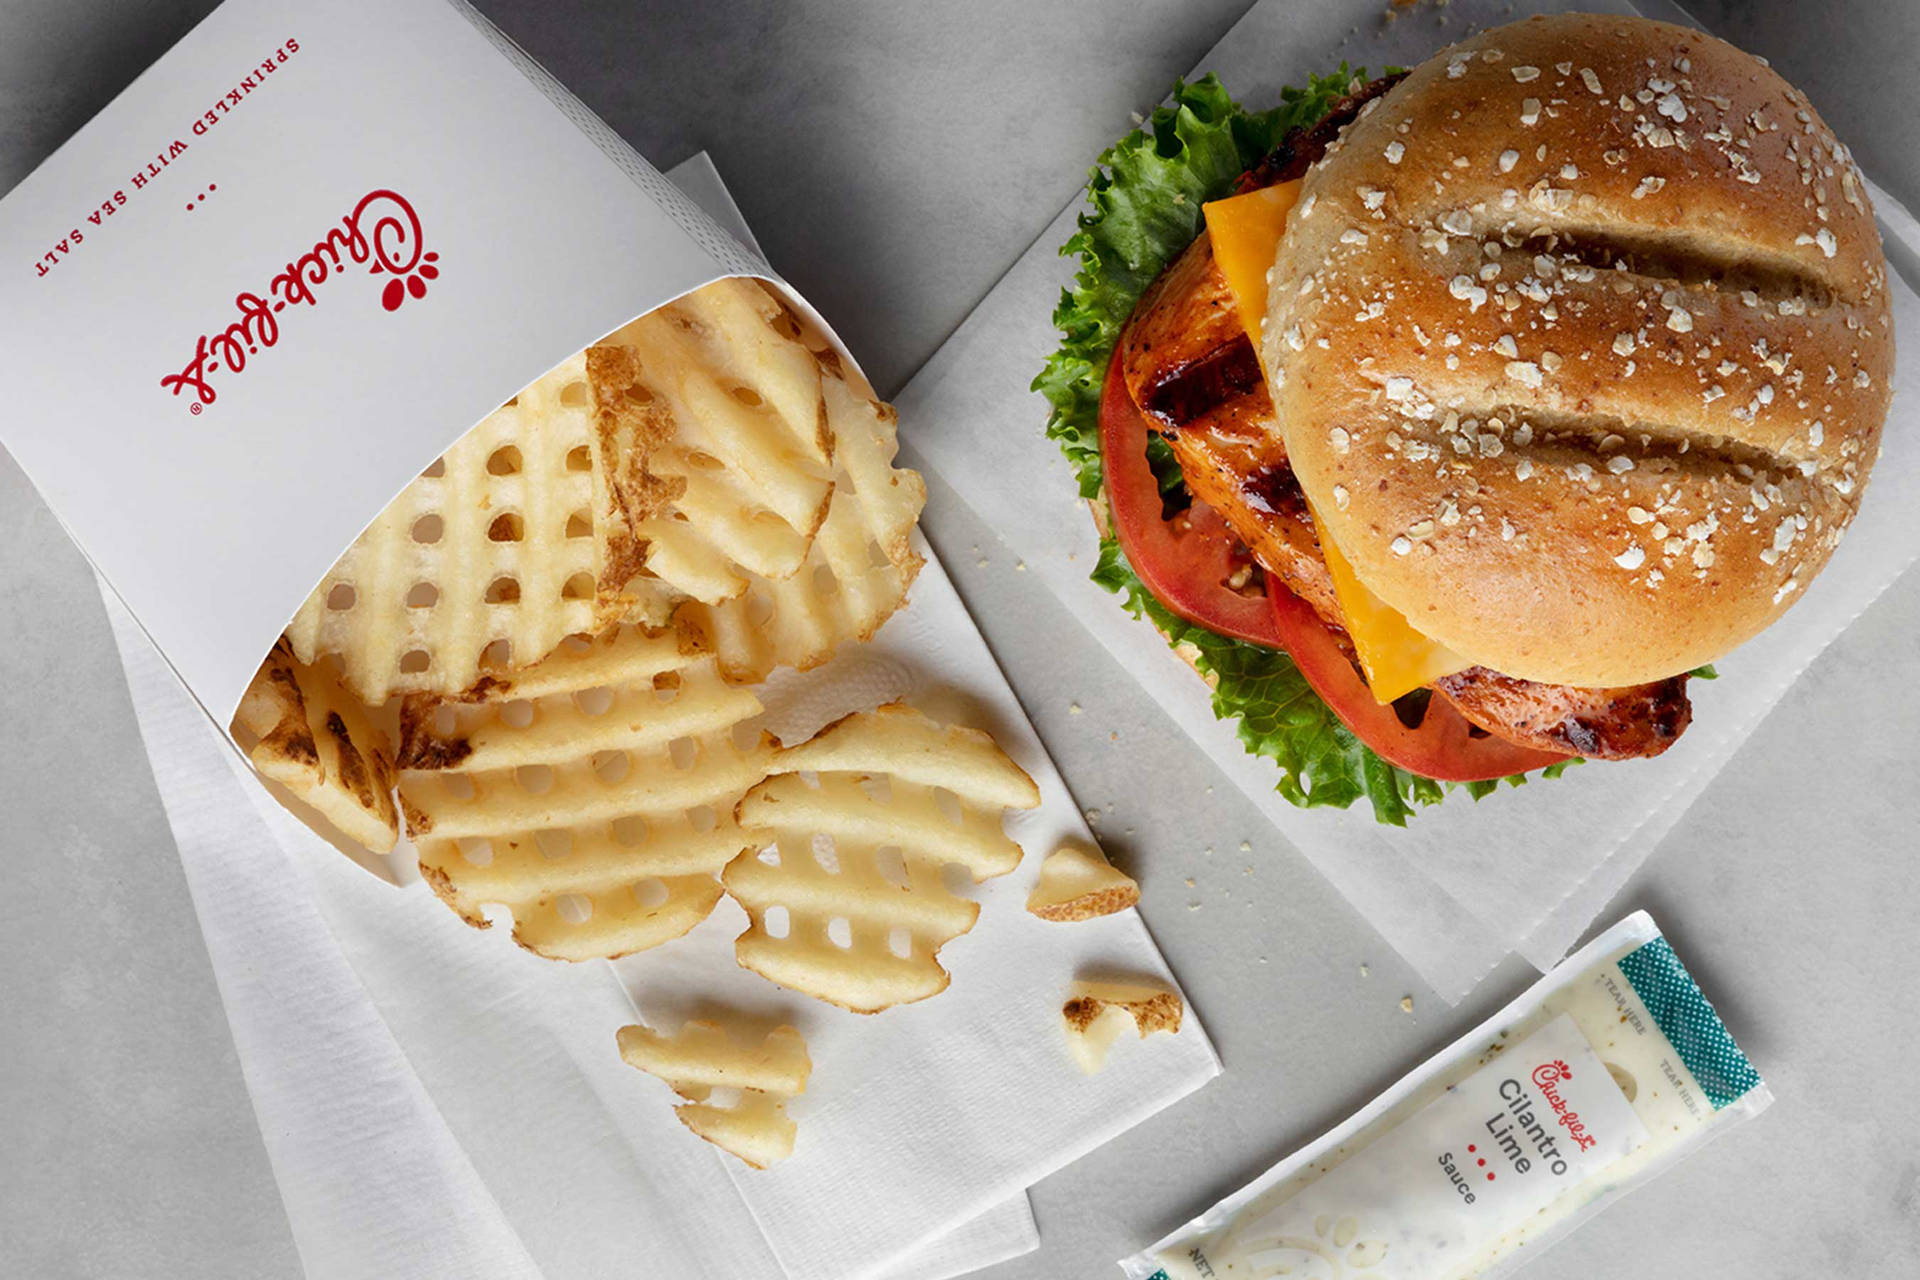 Savor The Taste With Chick-fil-a's Deluxe Meal Background